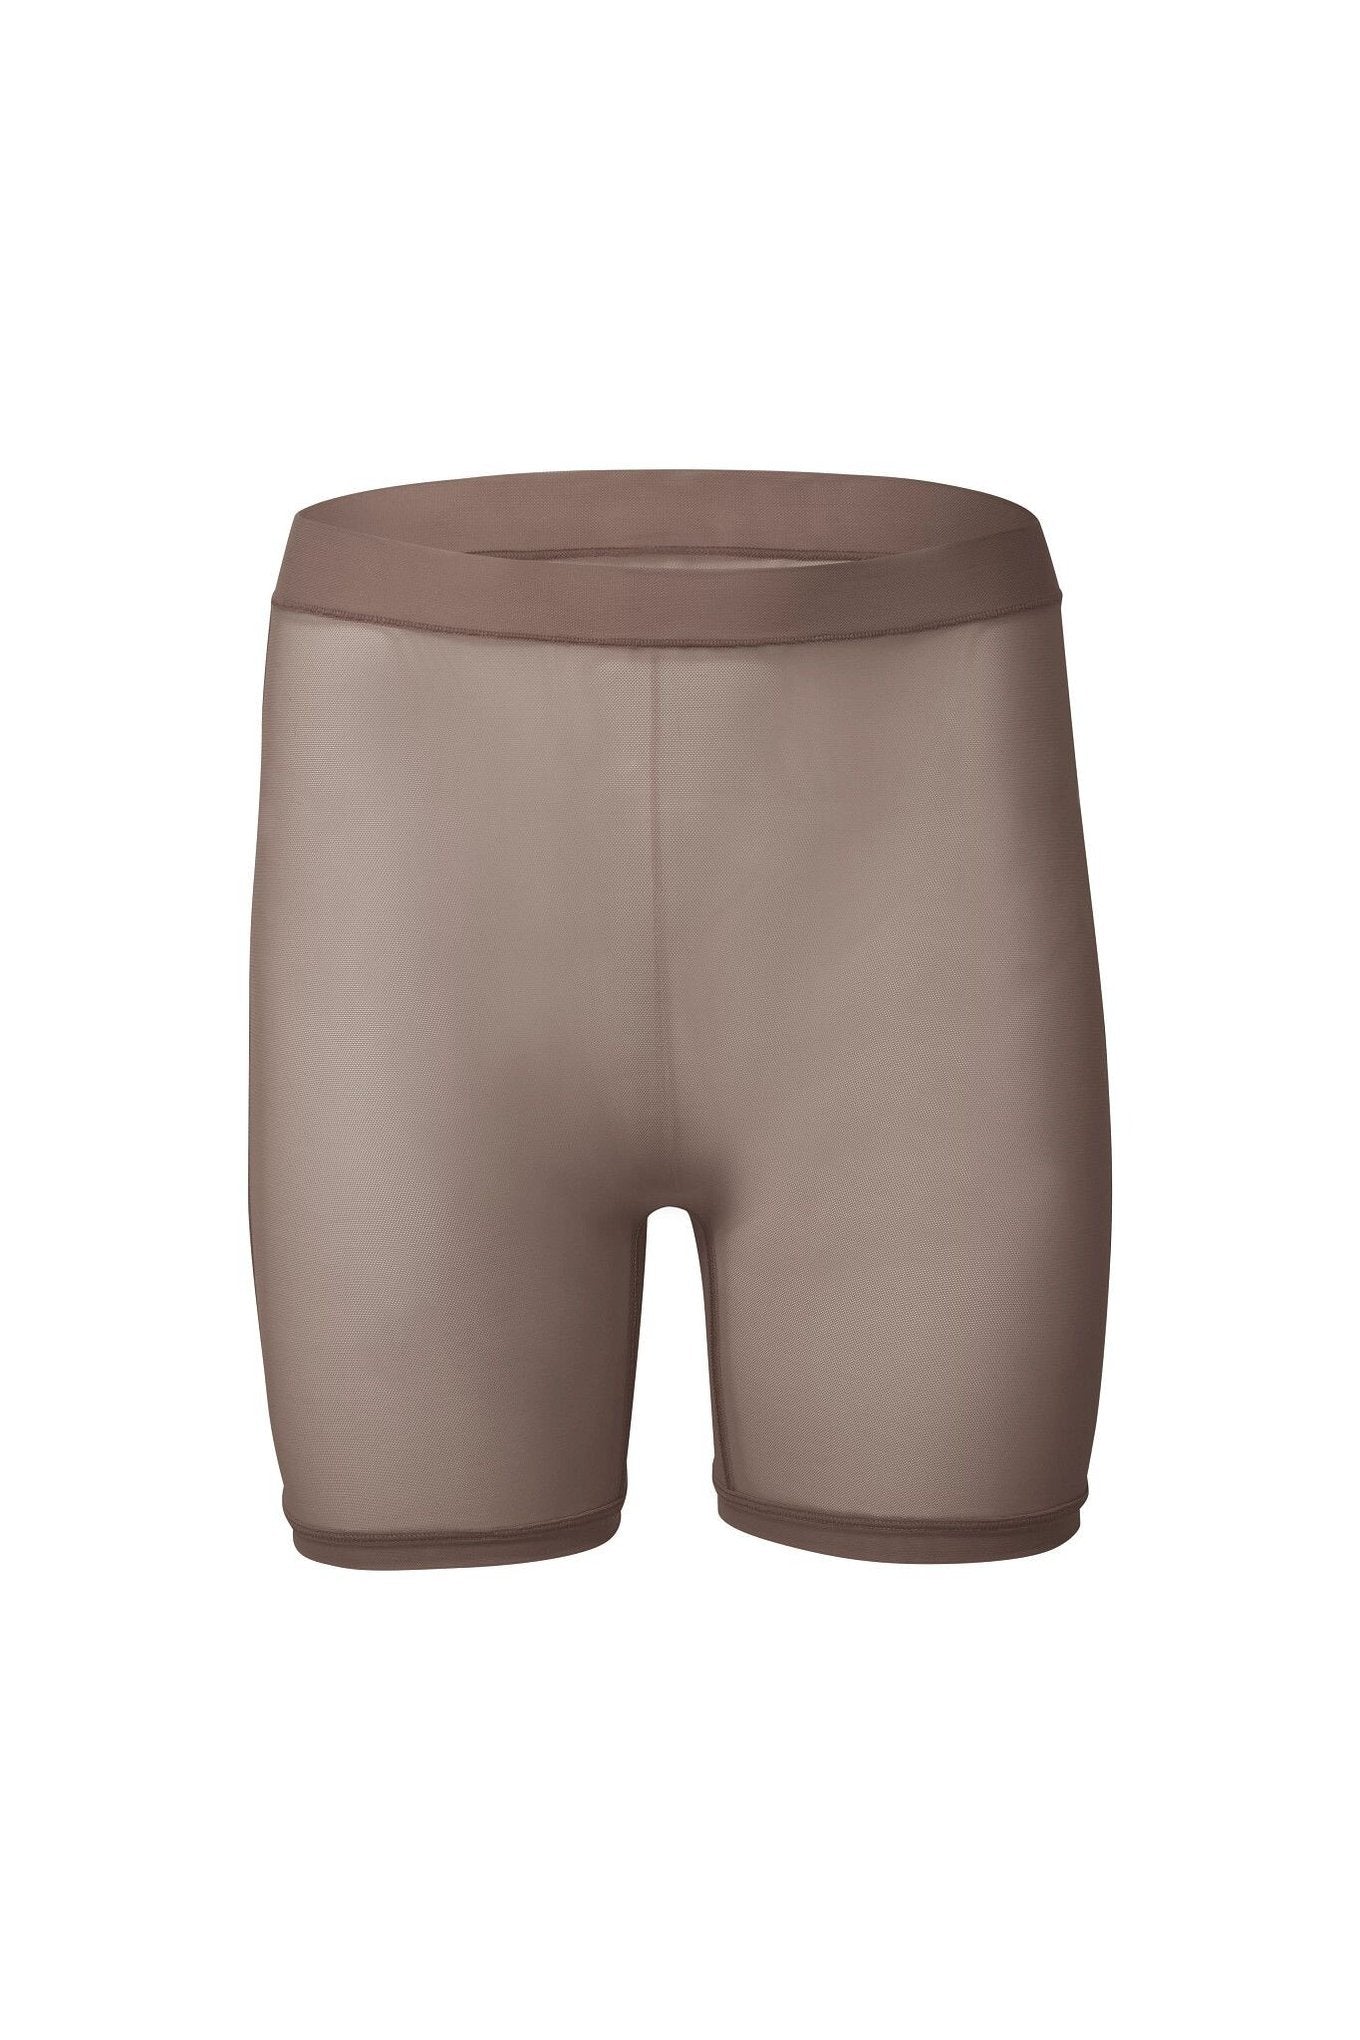 nueskin Dina Mesh High-Rise Shortie in color Deep Taupe and shape shortie